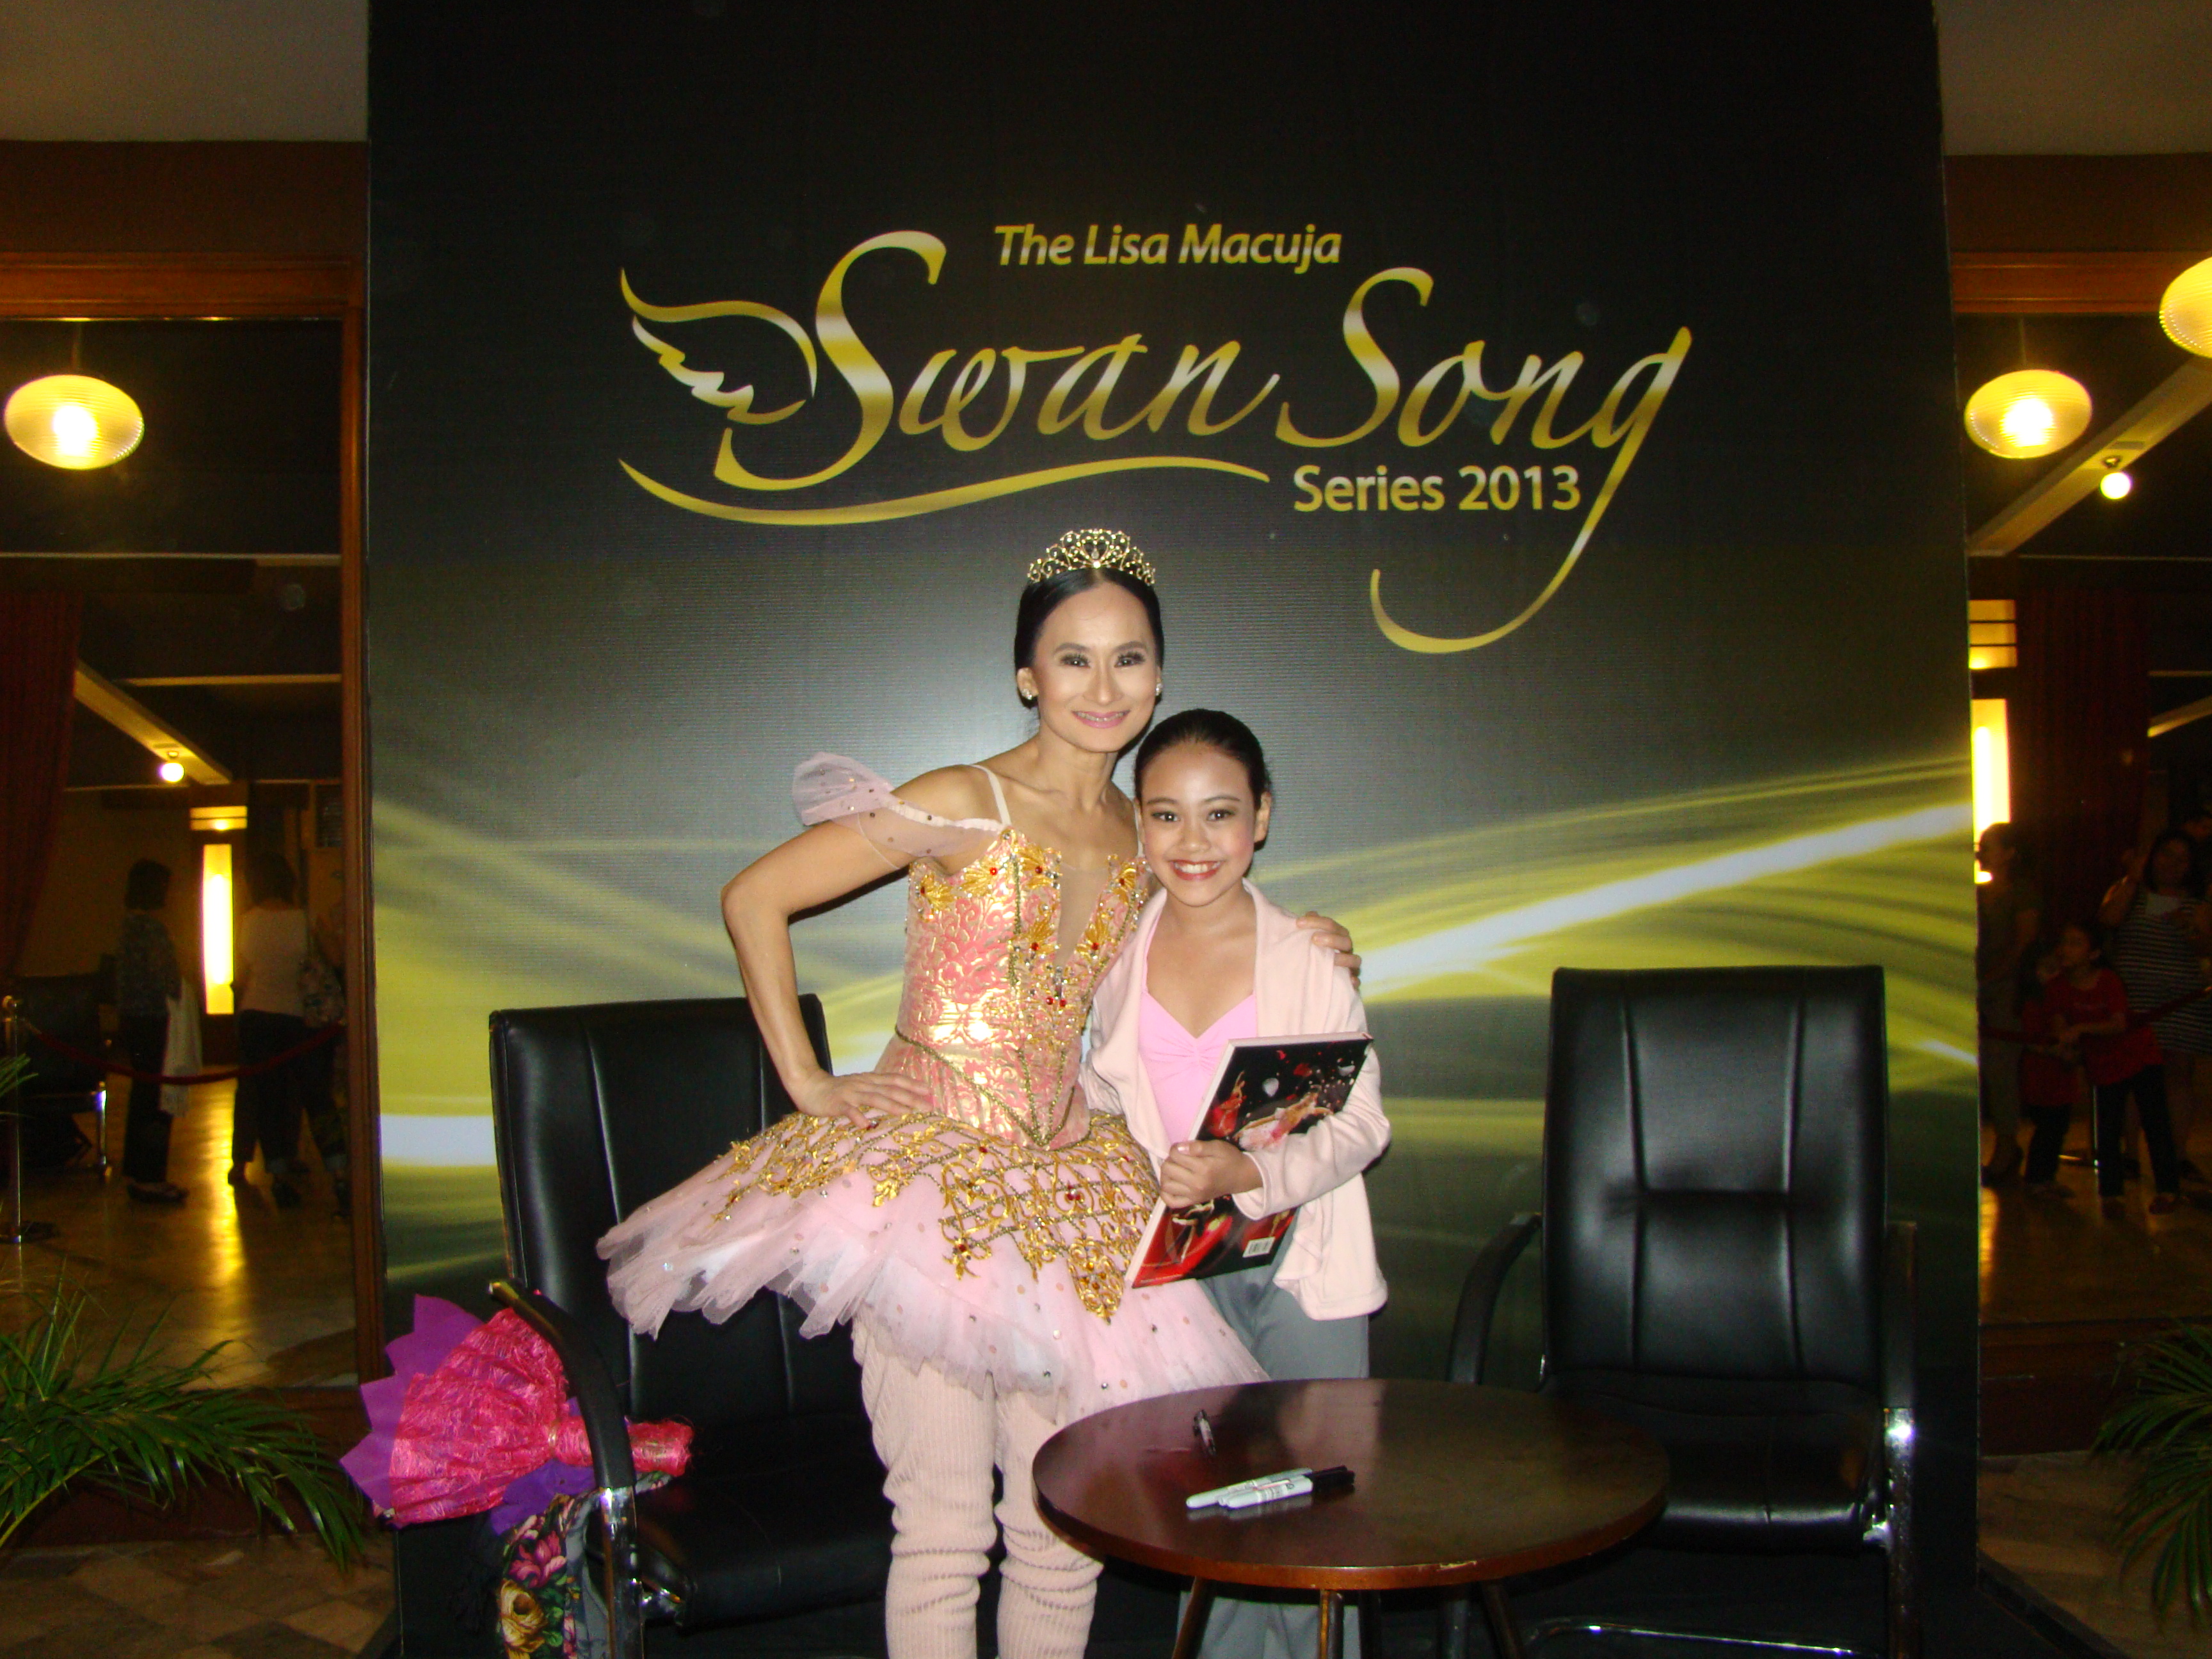 Ashley made sure she got an autograph from her idol and mentor, prima ballerina Lisa Macuja-Elizalde, after the latter’s Swan Song Series performance in 2013.